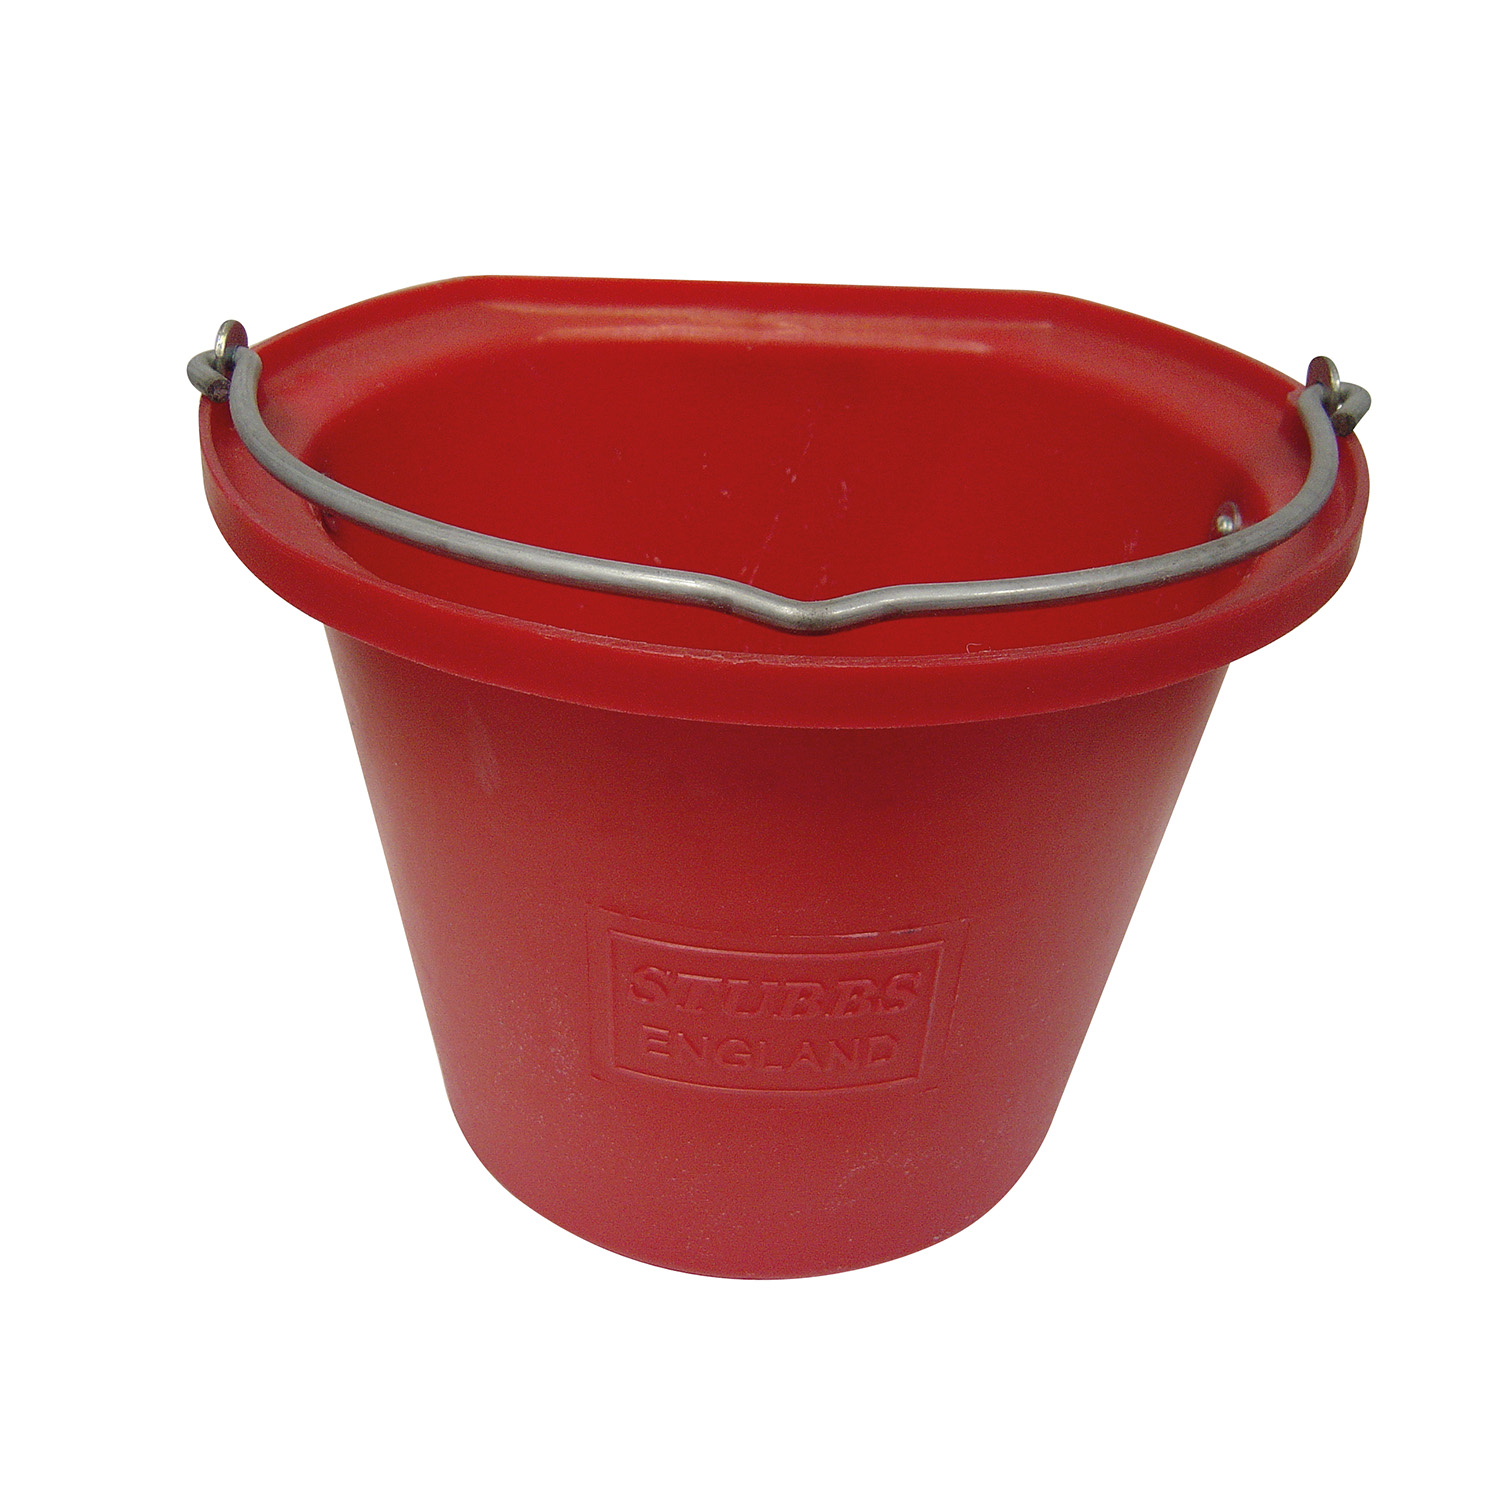 STUBBS HANGING BUCKET FLAT SIDED SMALL 14 LT S85  RED 14 LT